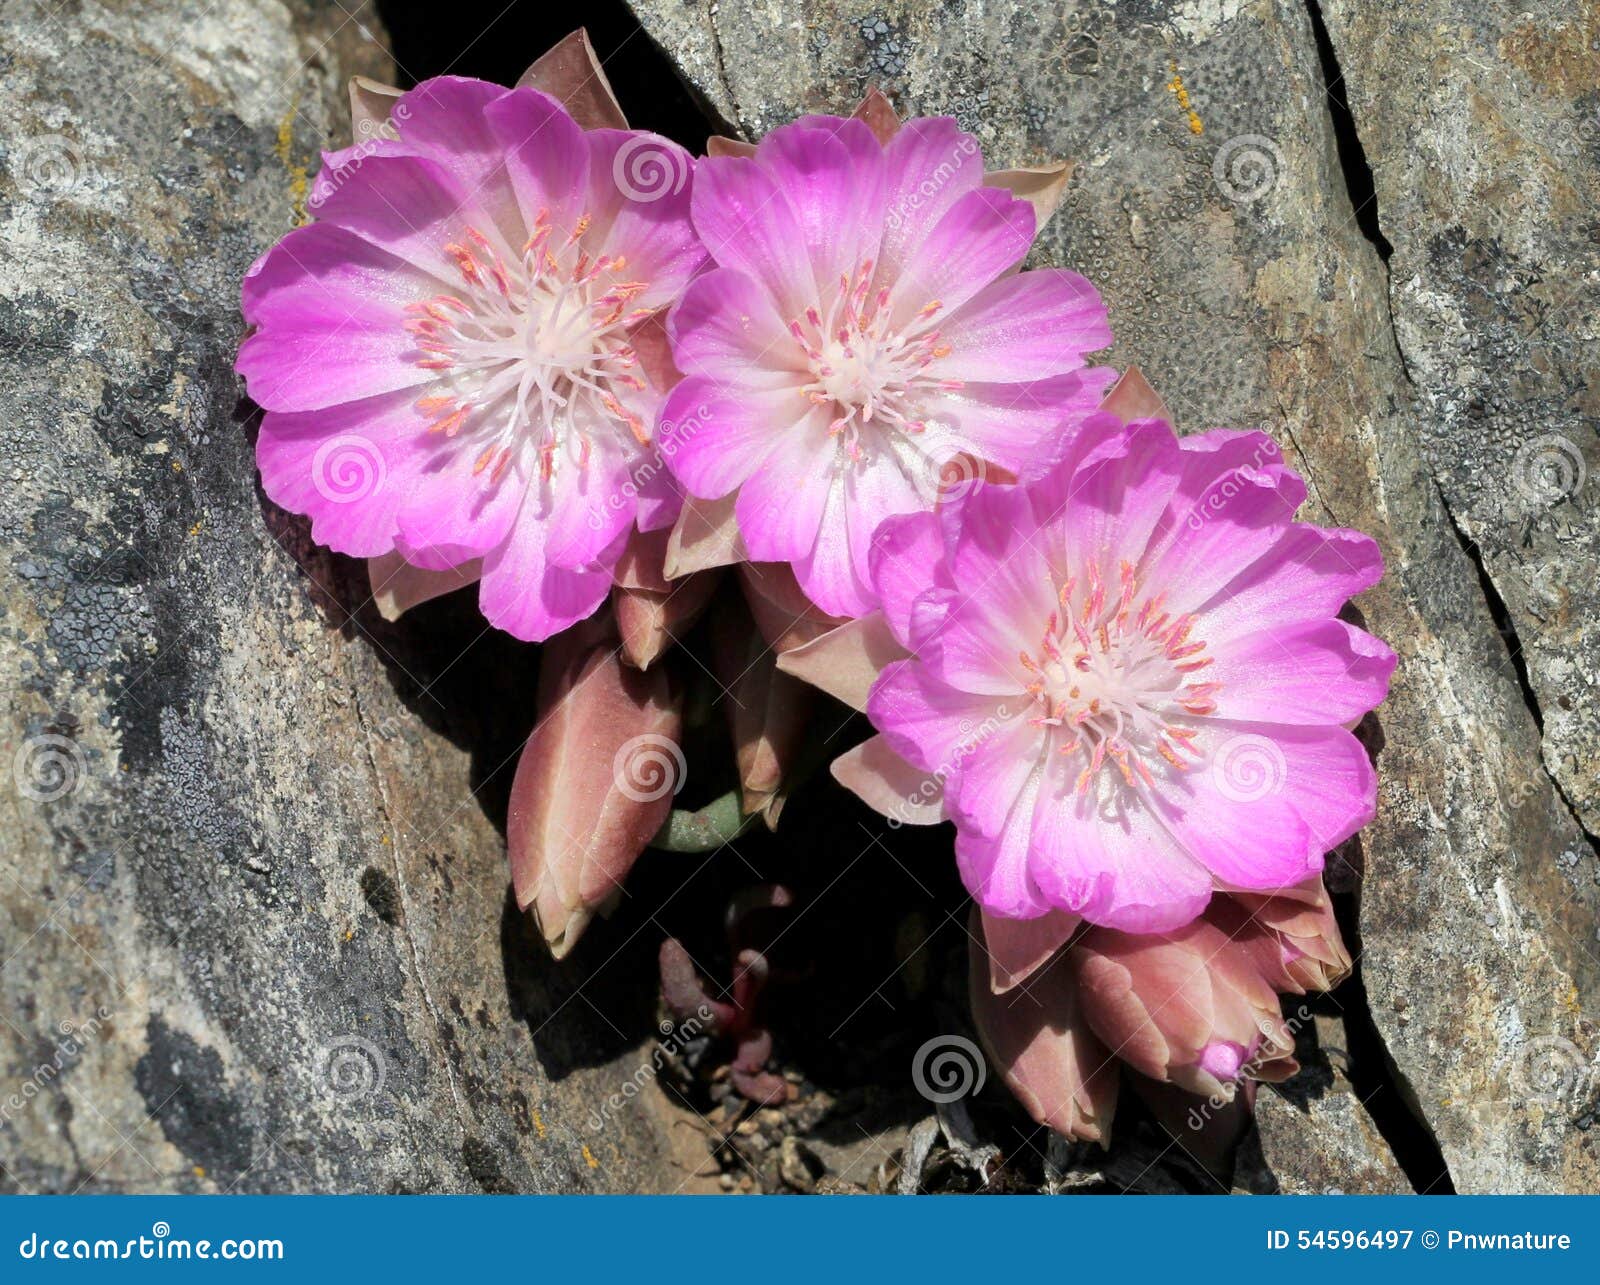 three bitterroot flowers in a crevice